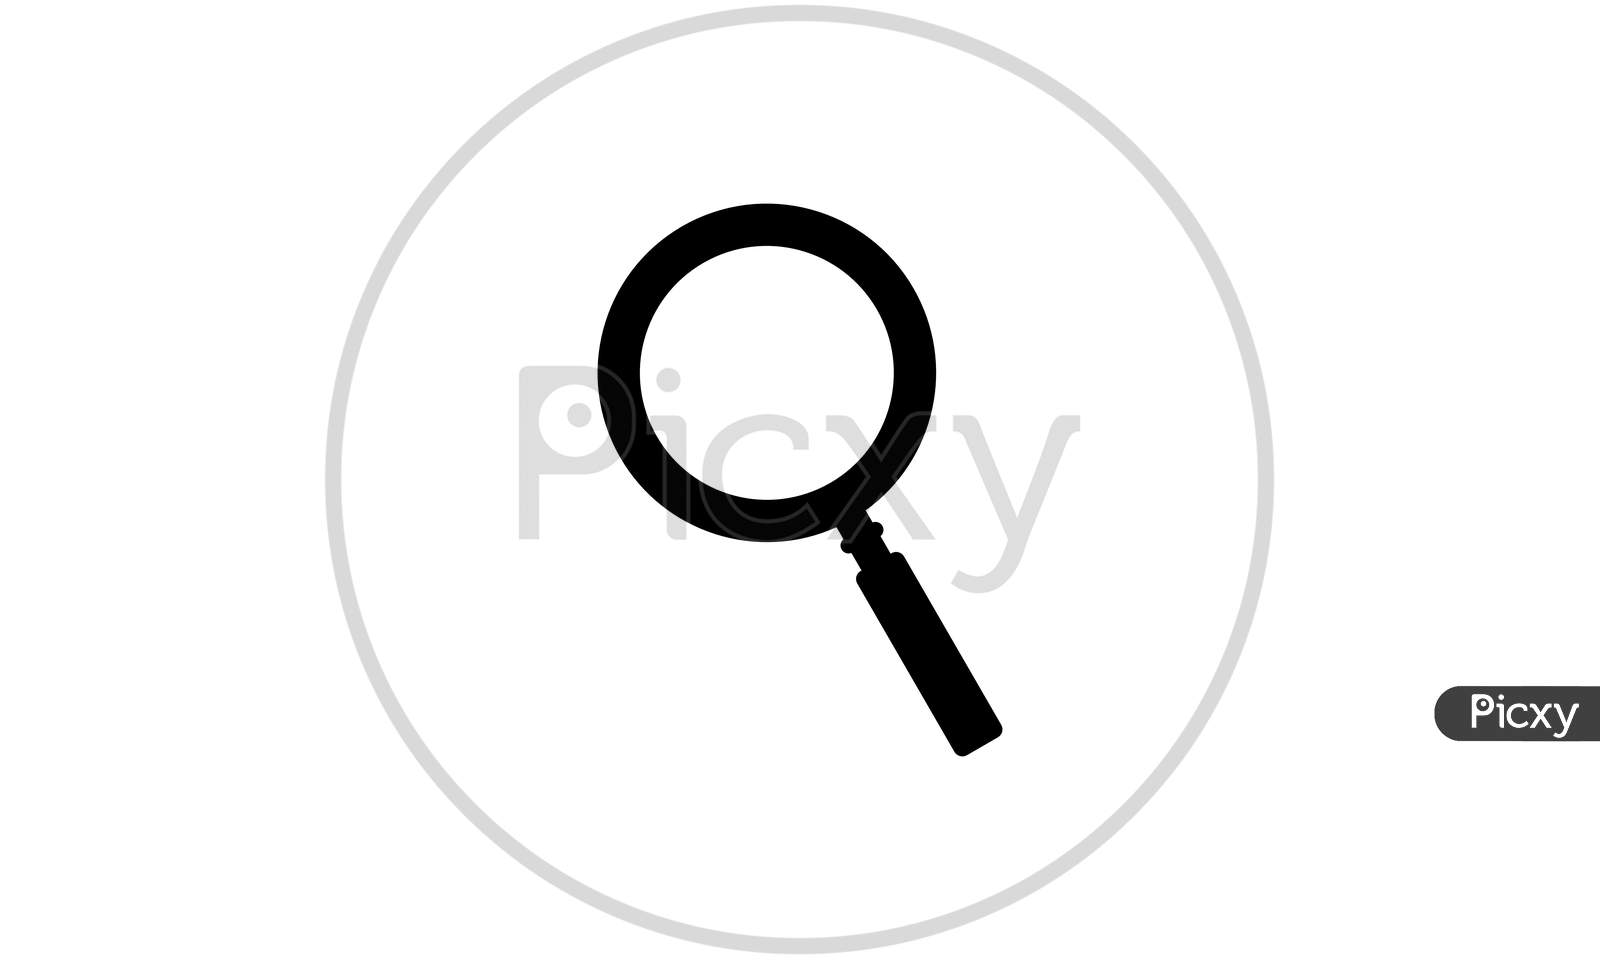 Magnifying Glass For Zoom In Or Searching For Detail